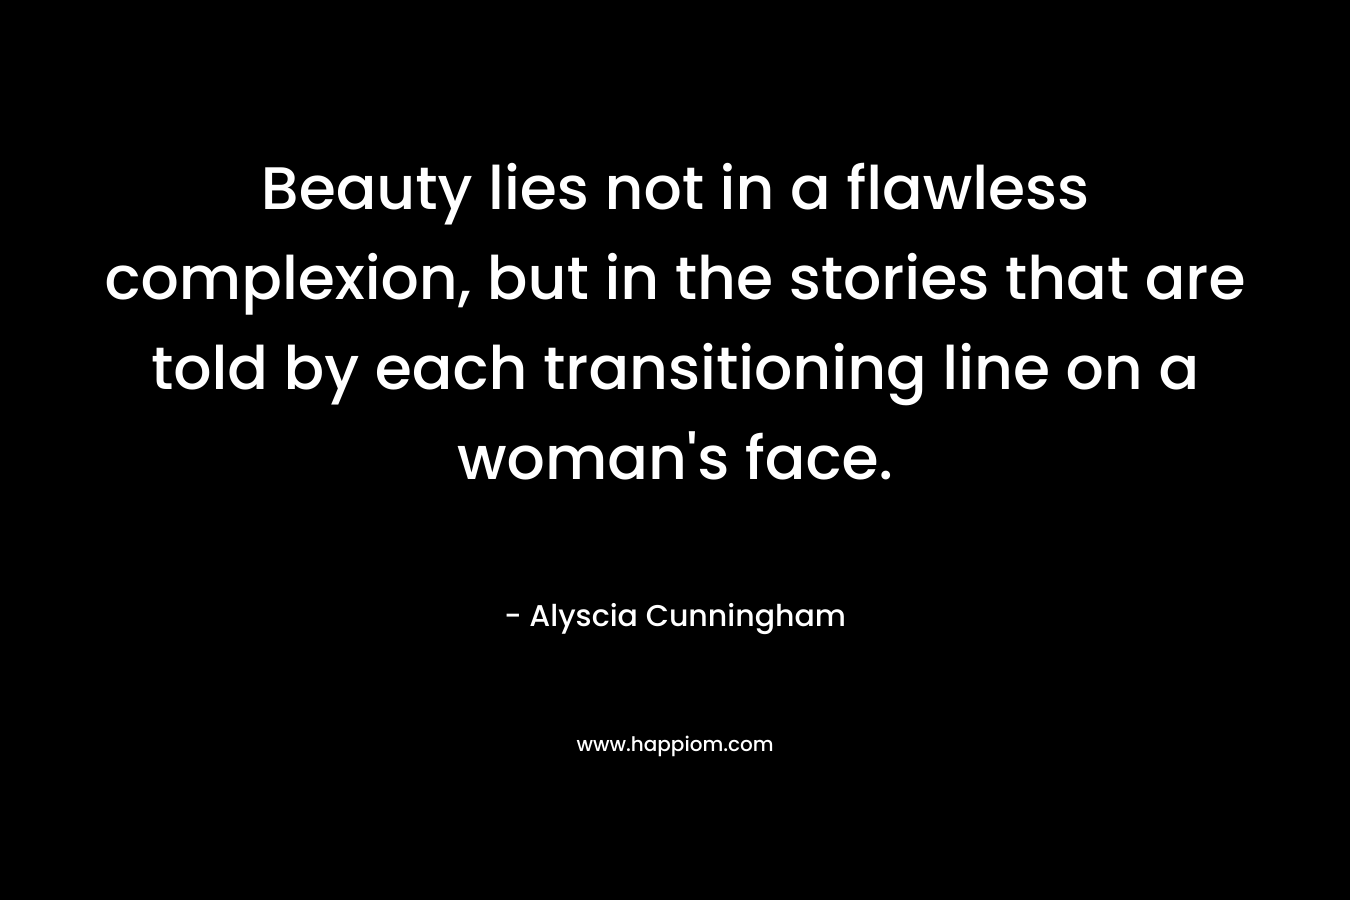 Beauty lies not in a flawless complexion, but in the stories that are told by each transitioning line on a woman’s face. – Alyscia Cunningham